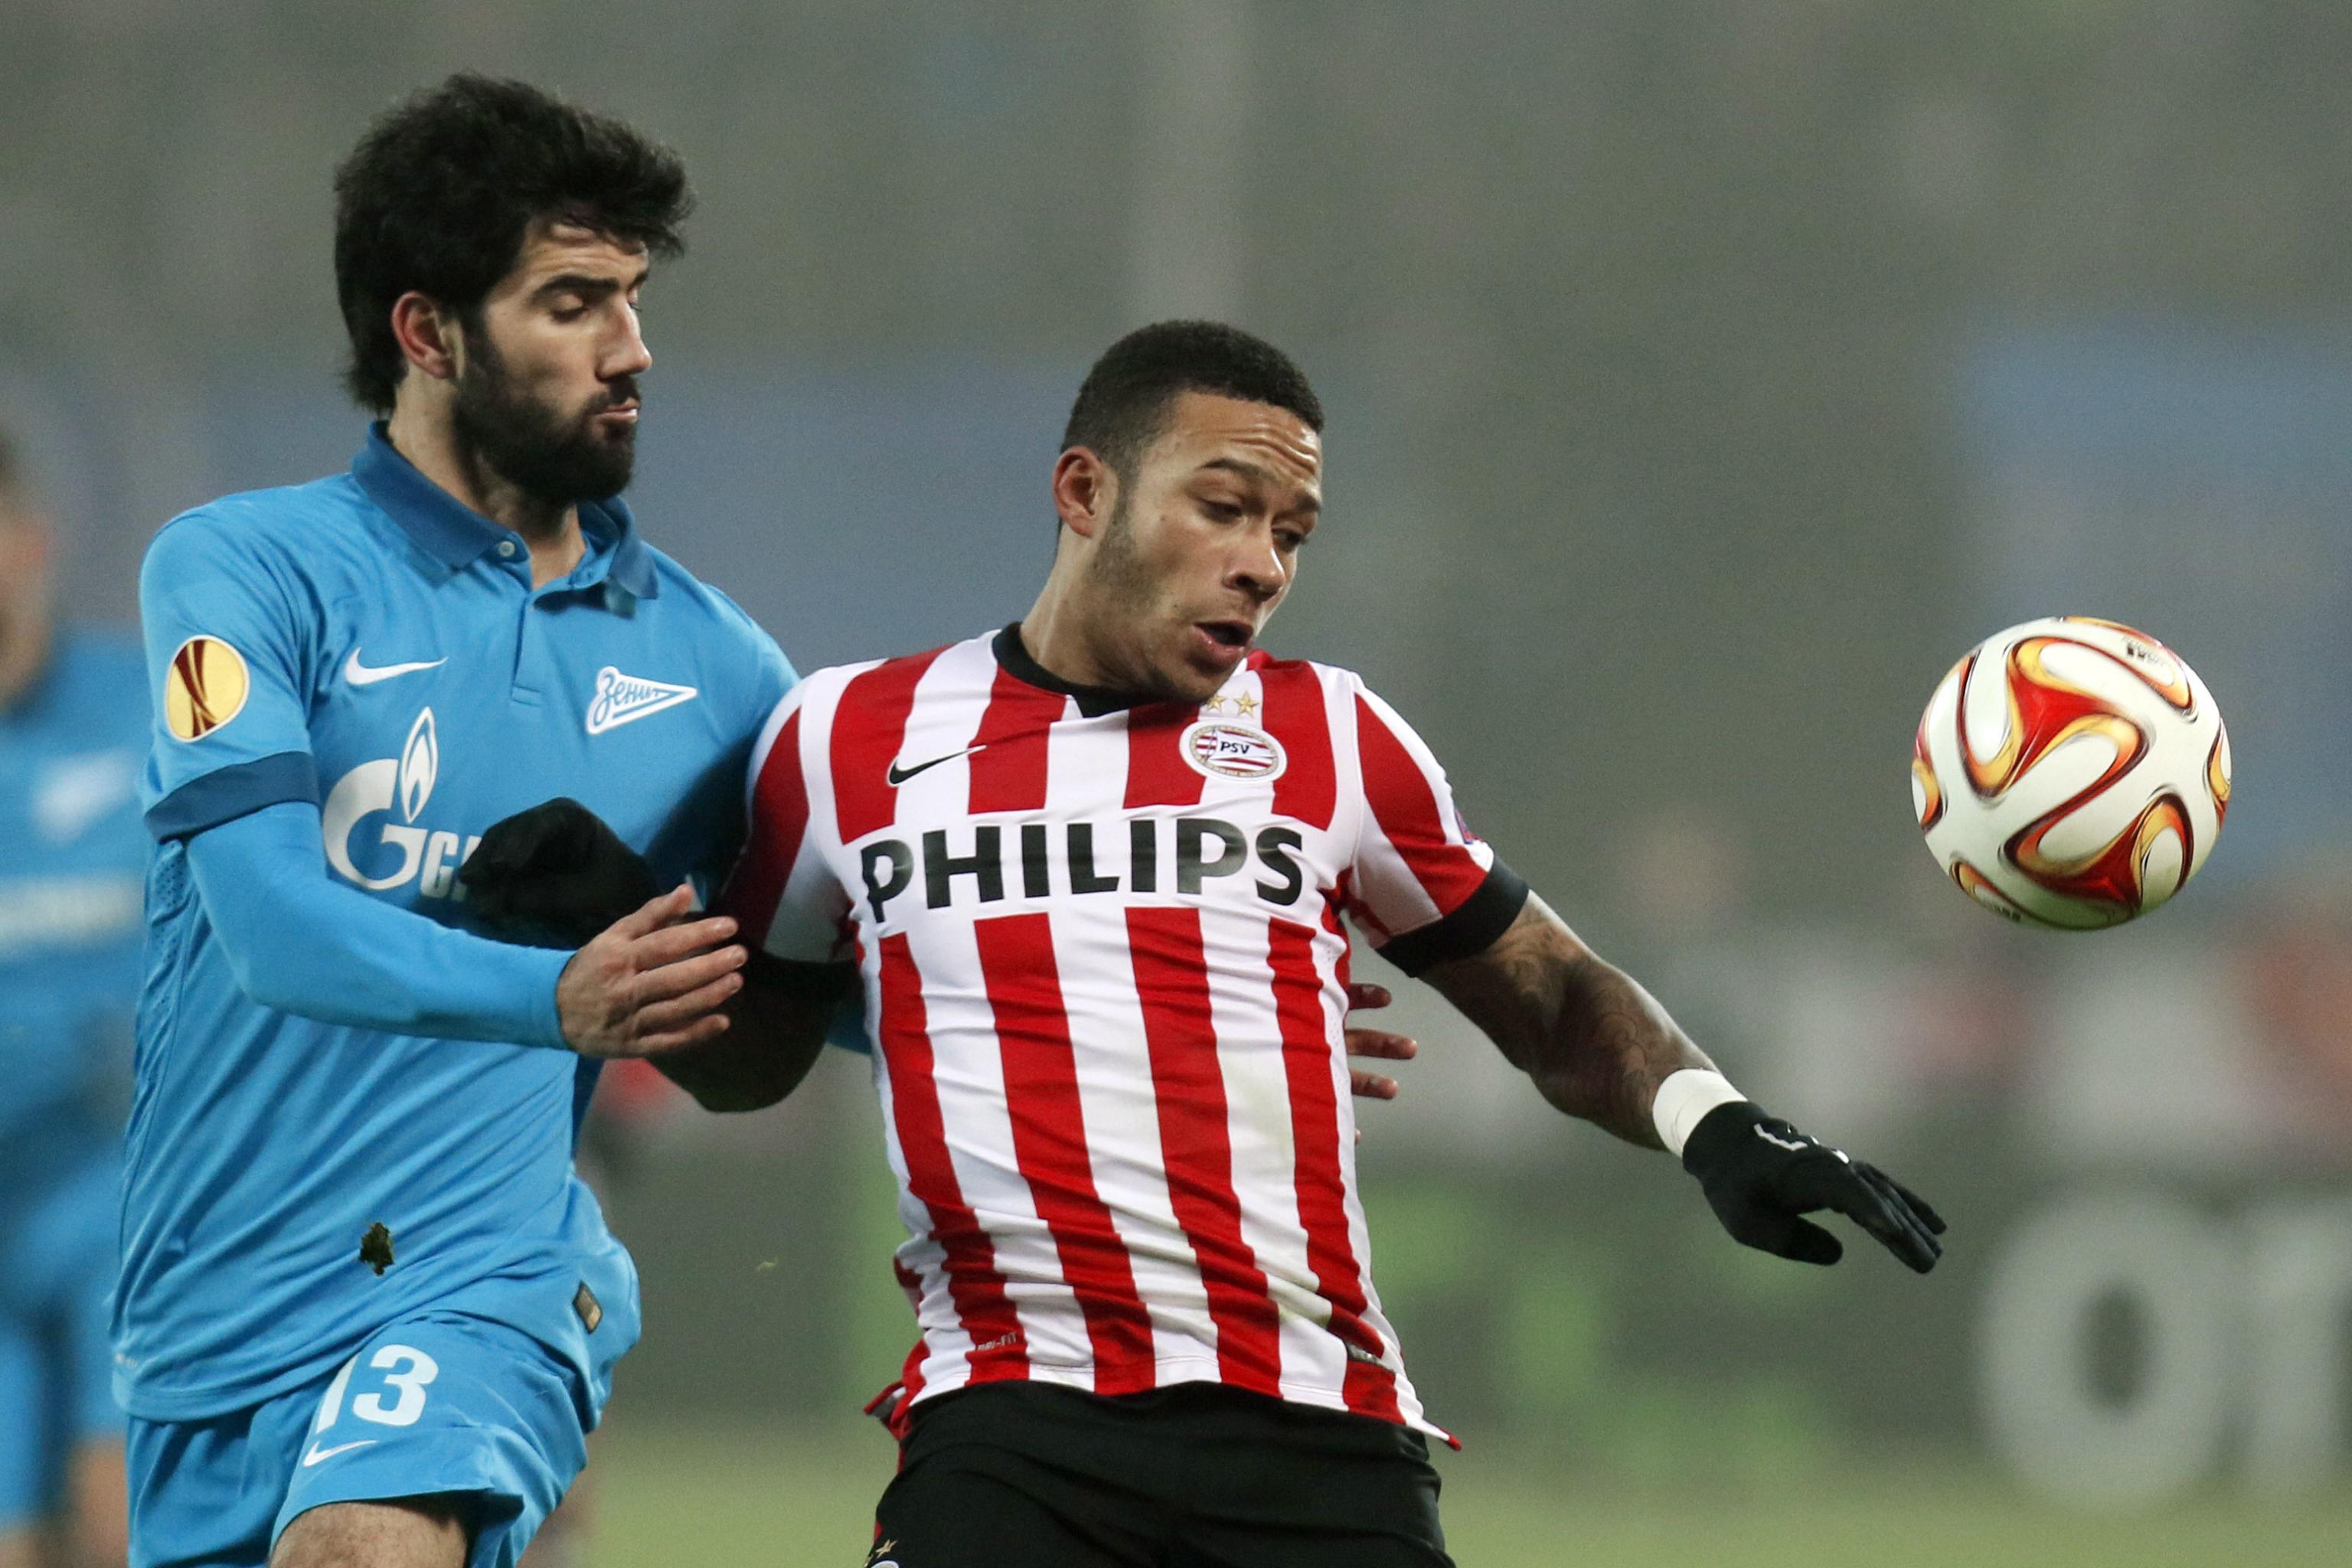 Memphis Depay was too young at Manchester United says Ronald